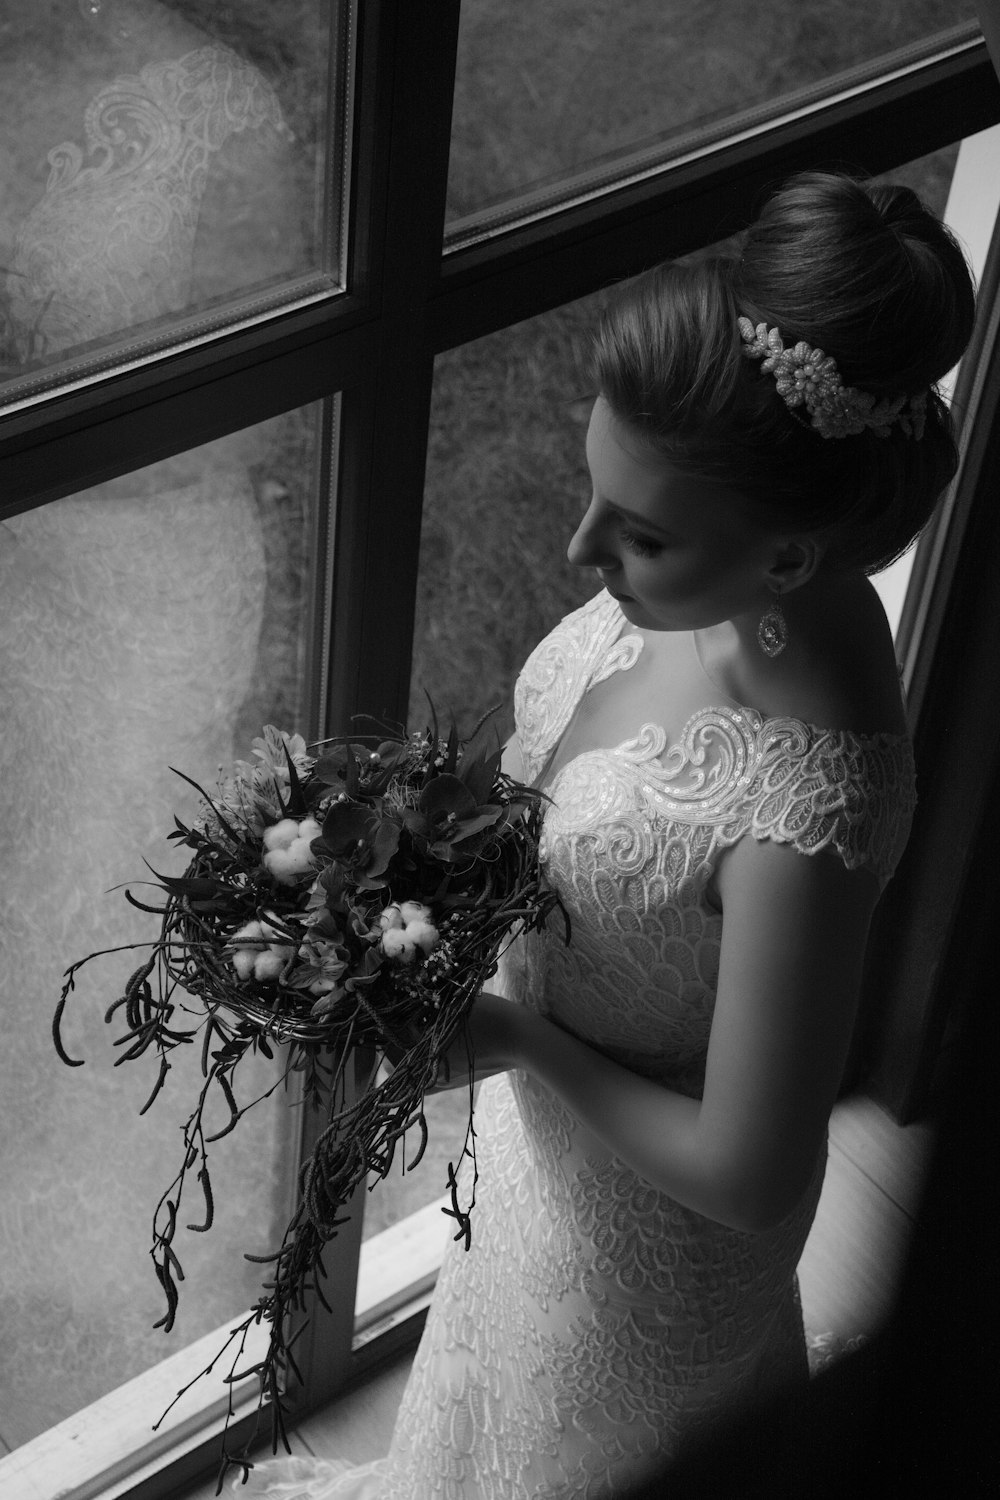 woman wearing white floral wedding dress holding bouquet